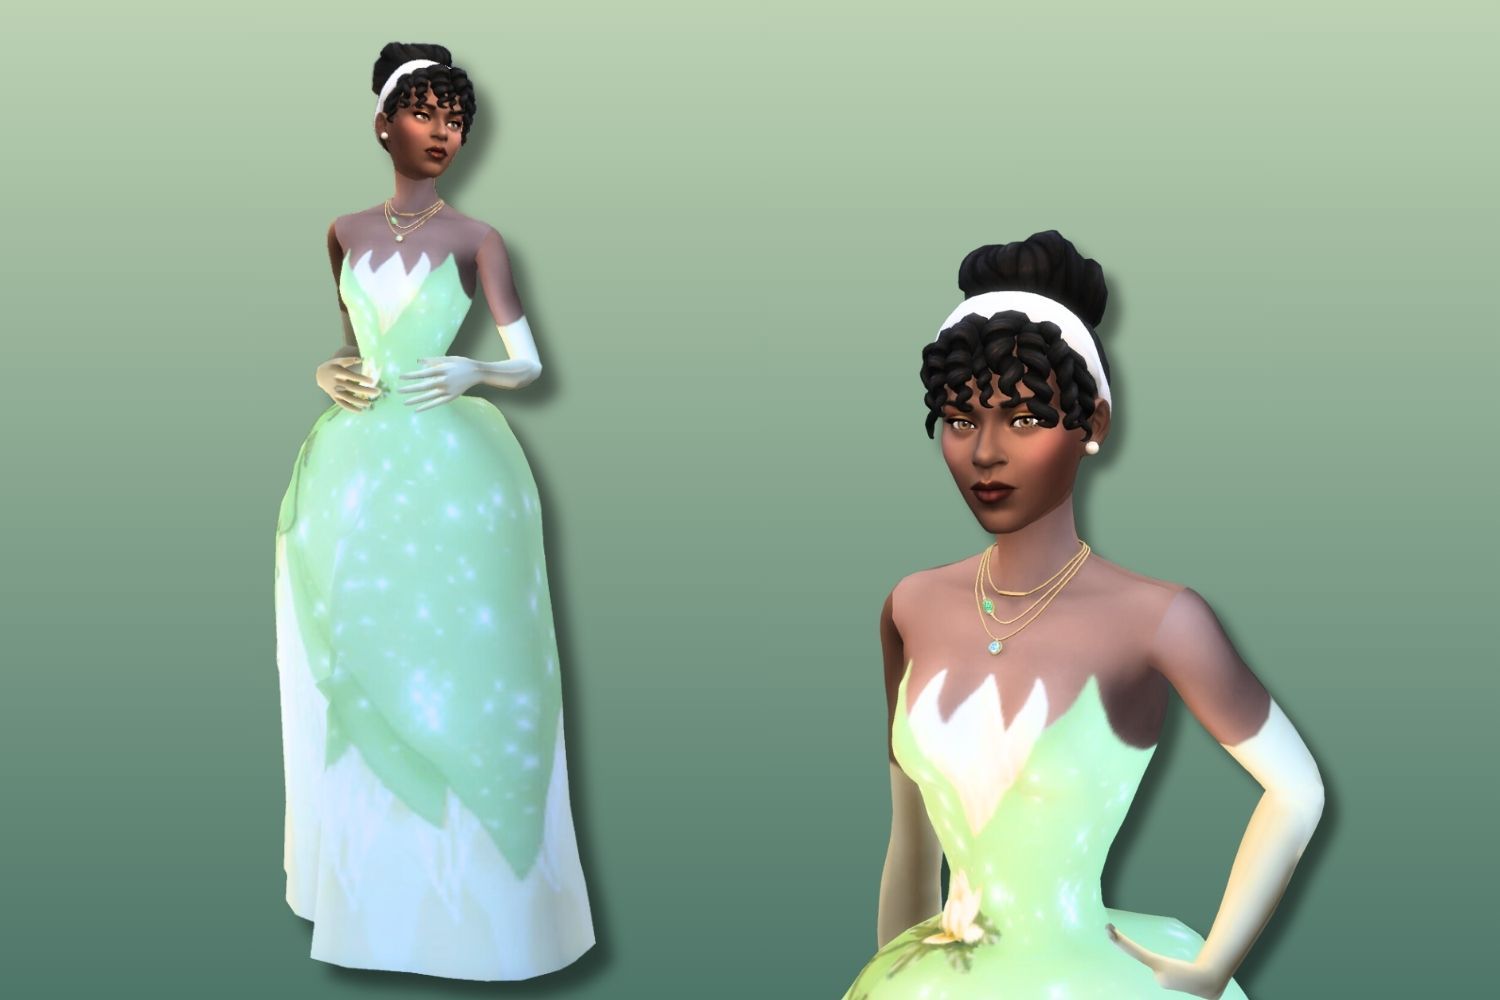 A Sim that looks like Tiana from Disney's The Princess and The Frog is shown in front of a green background.